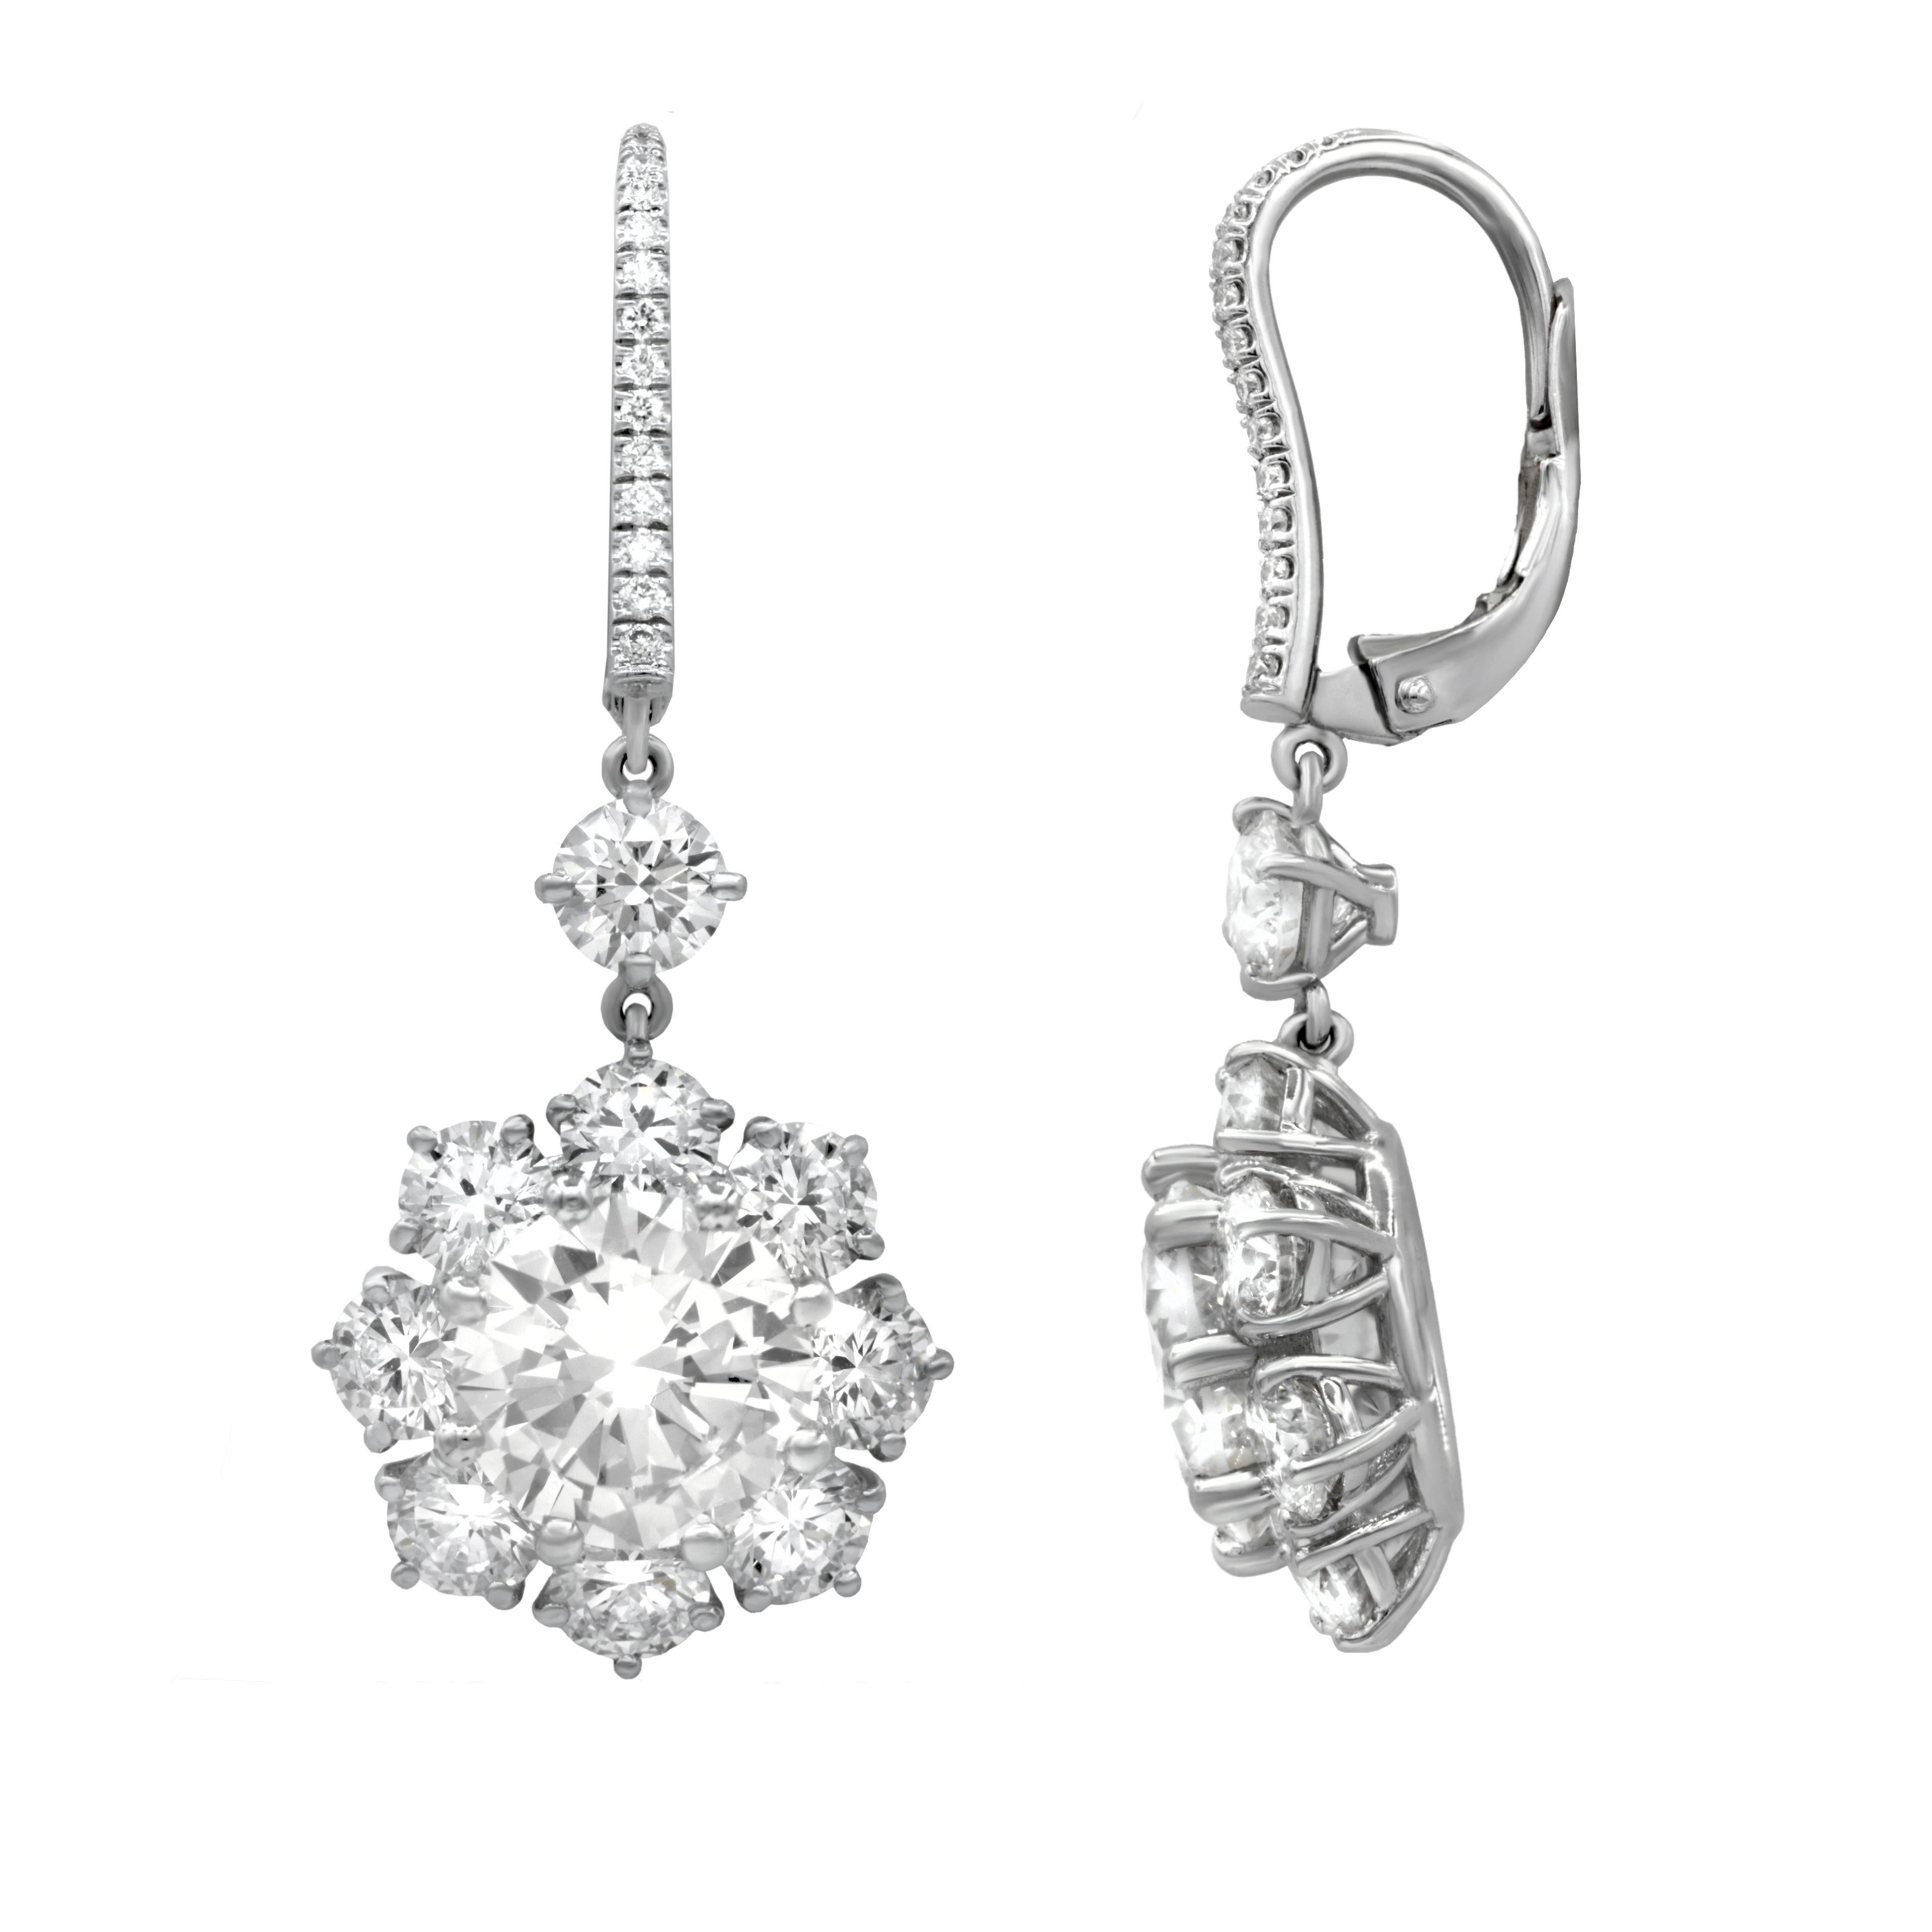 Magnificent 12.17 Carat Round Diamond Earrings In New Condition For Sale In New York, NY